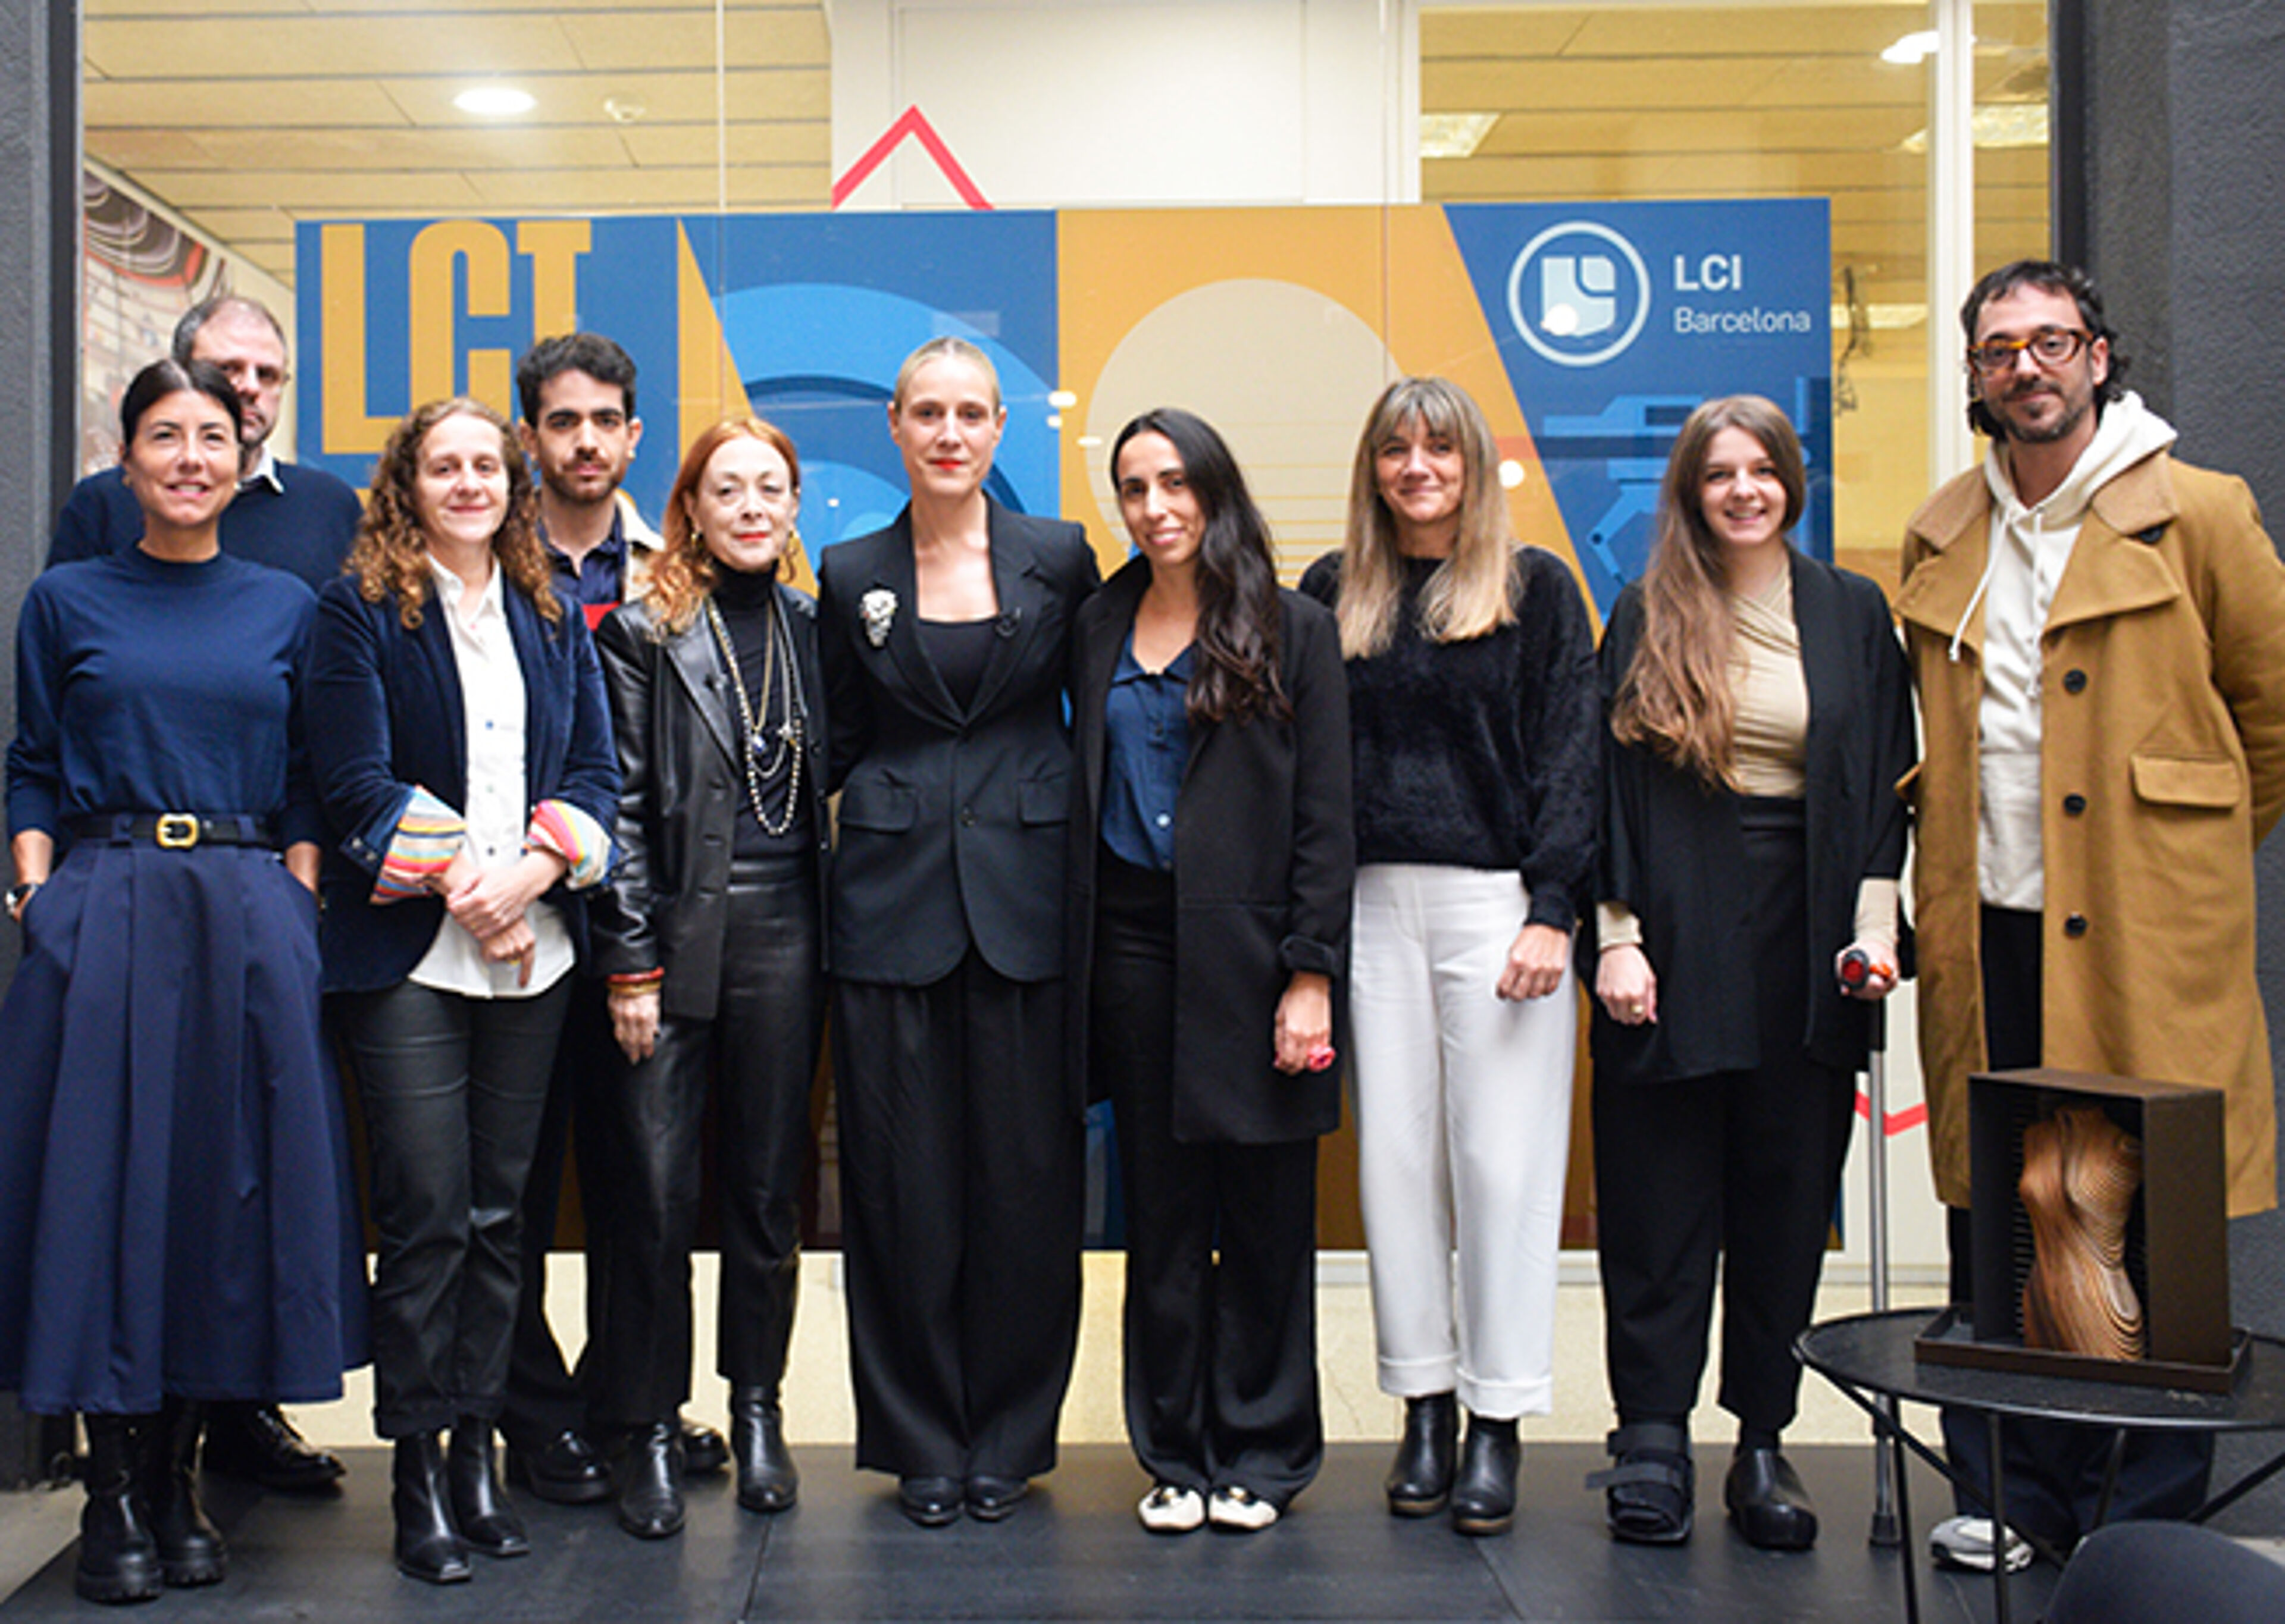  A group of professionals posing together for a team photo at LCI Barcelona, displaying a mix of casual and business attire.